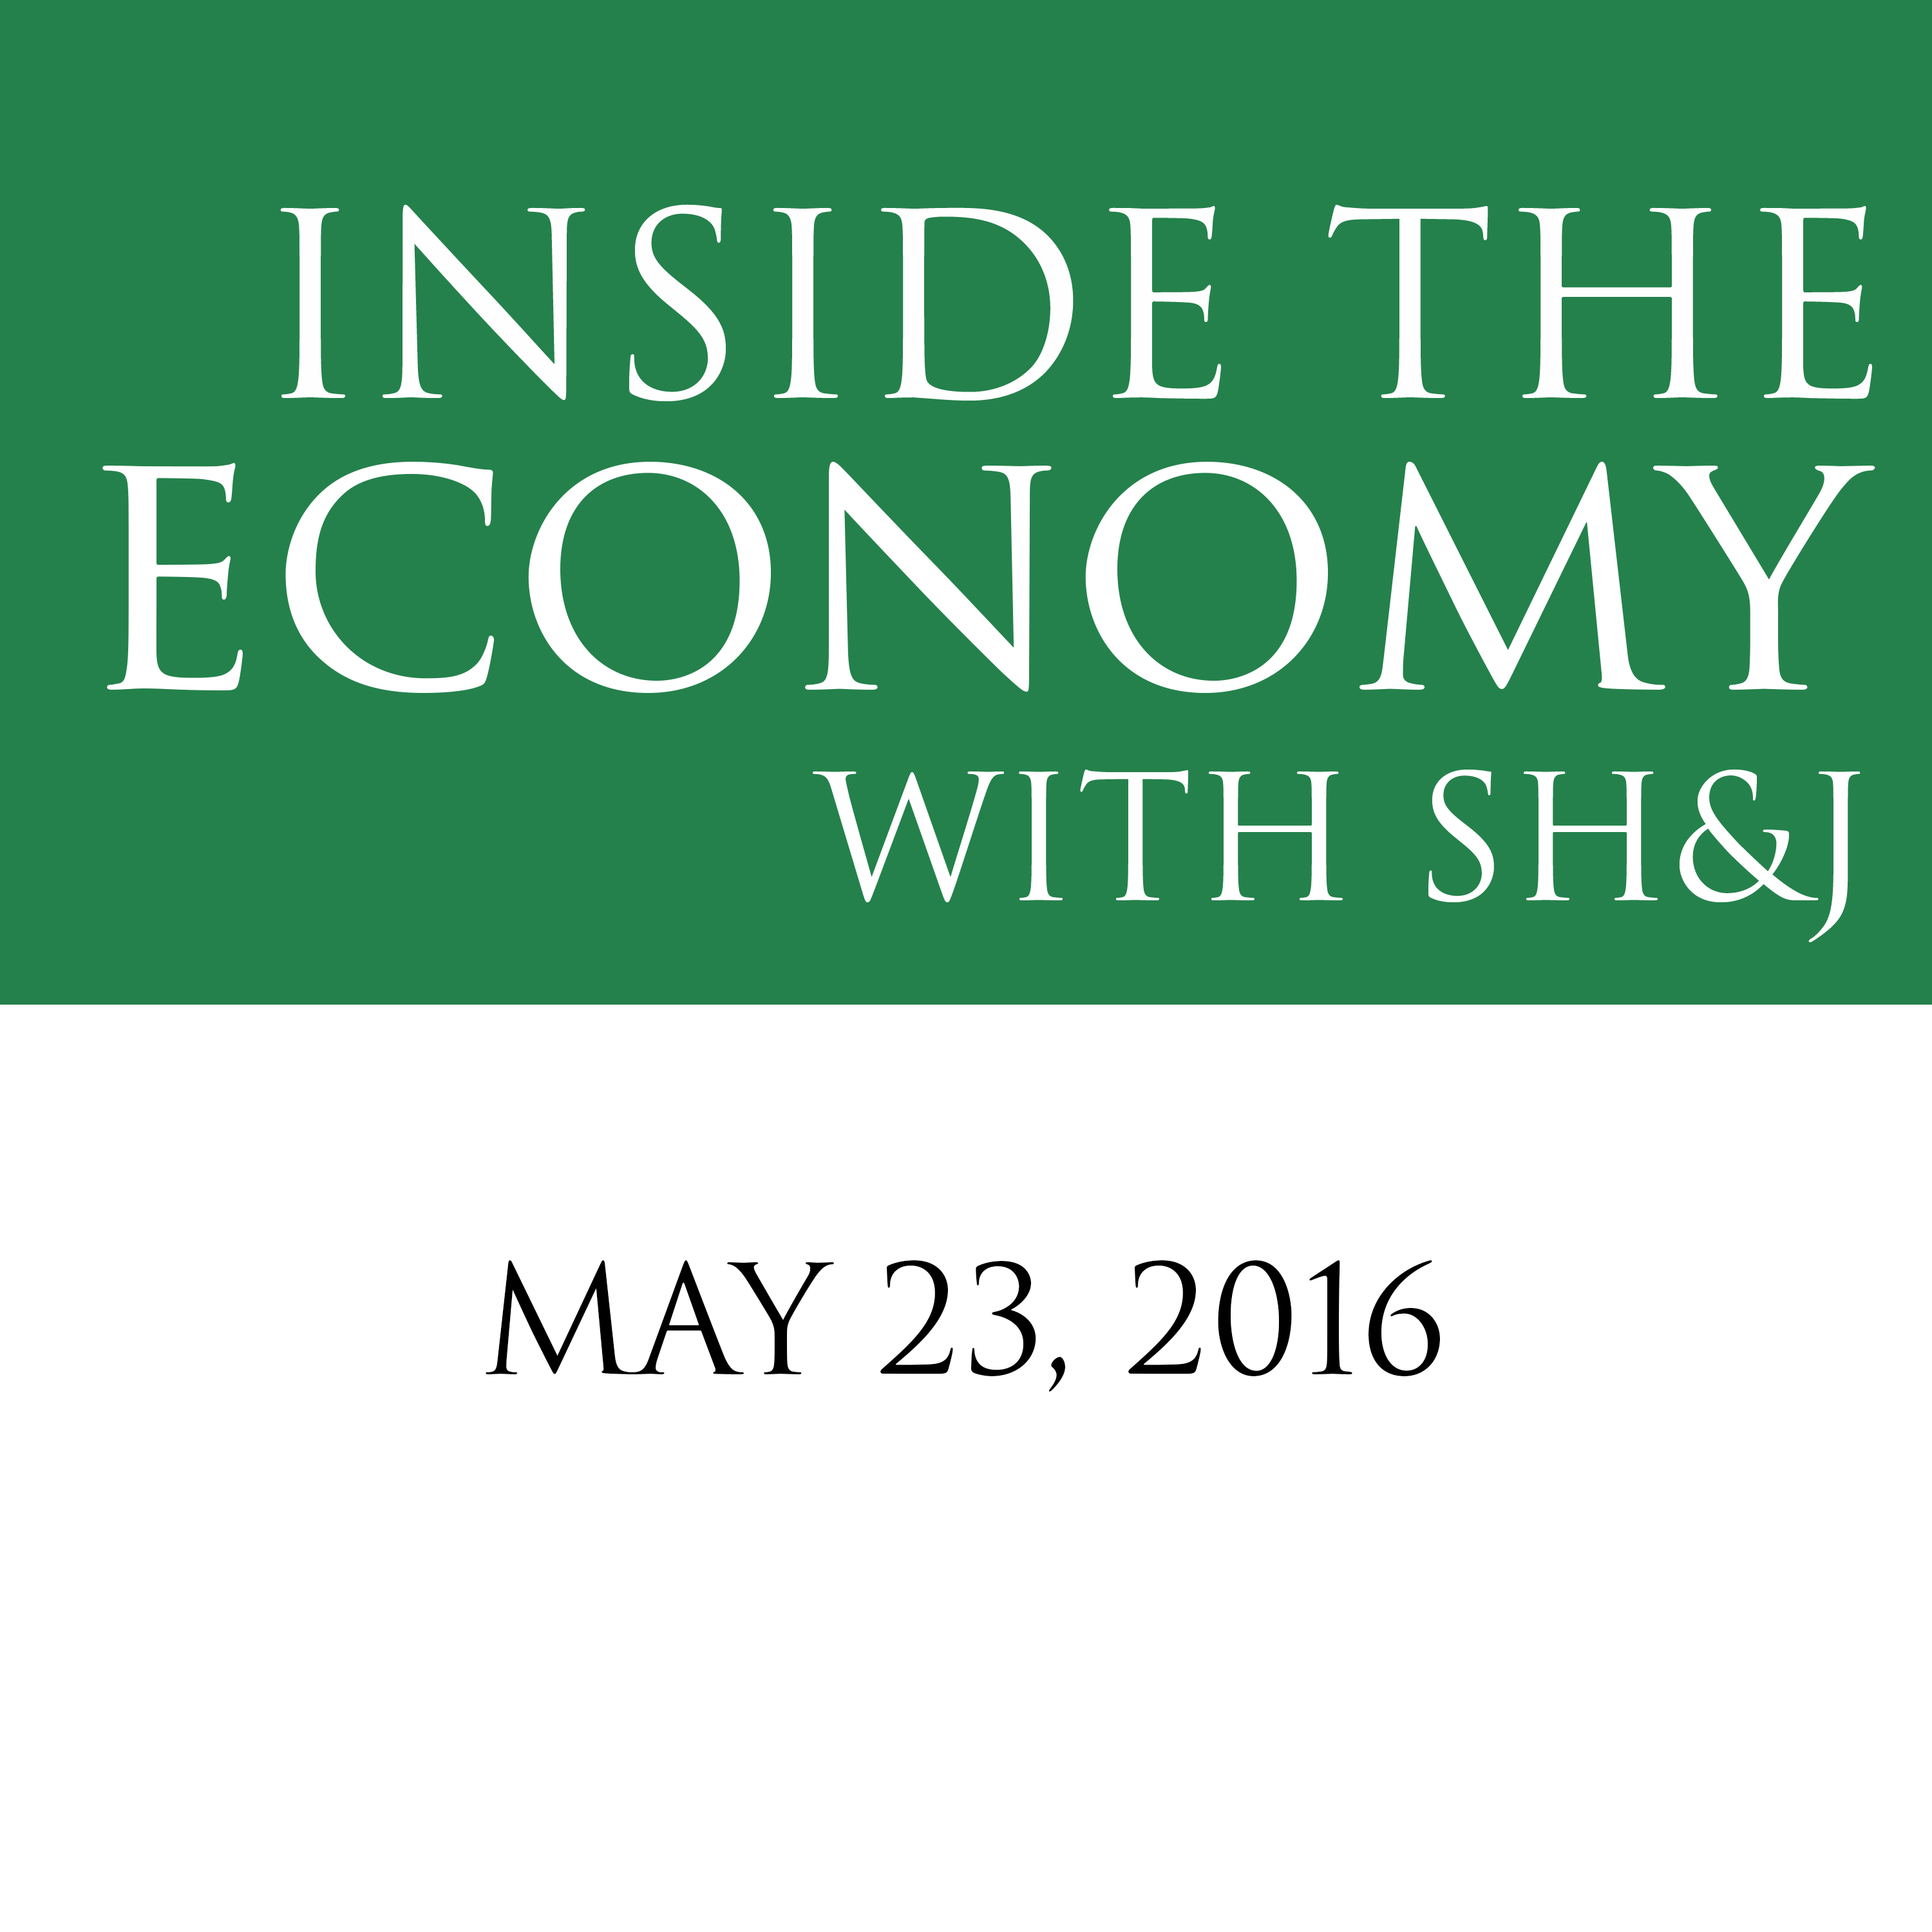 May 23, 2016  --  Inside the Economy With SH&J